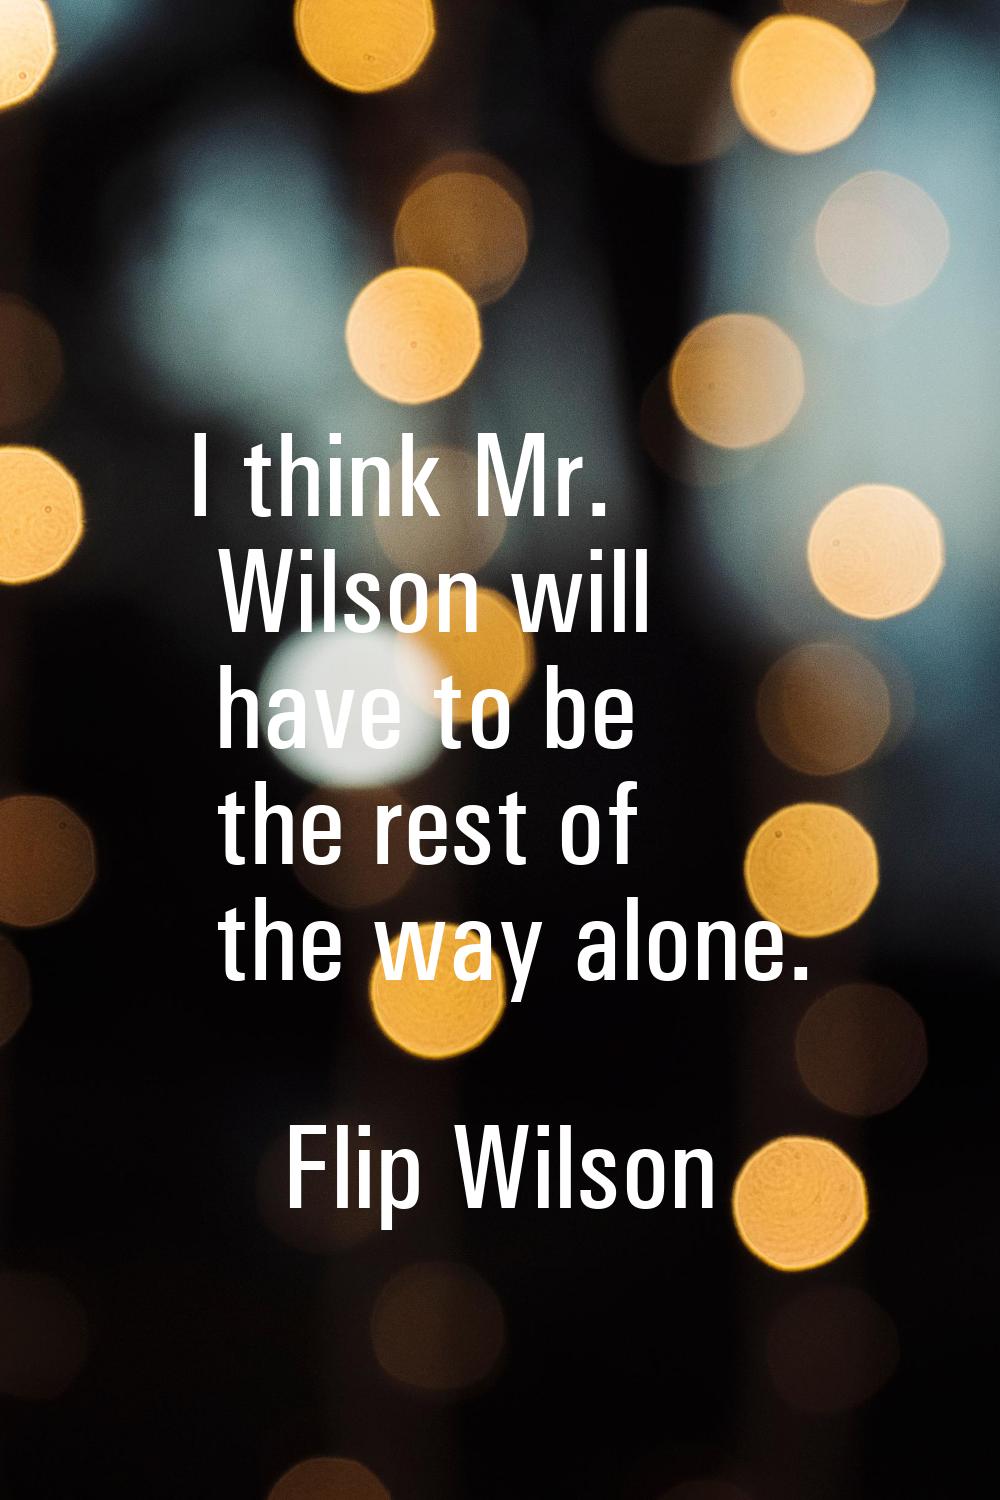 I think Mr. Wilson will have to be the rest of the way alone.